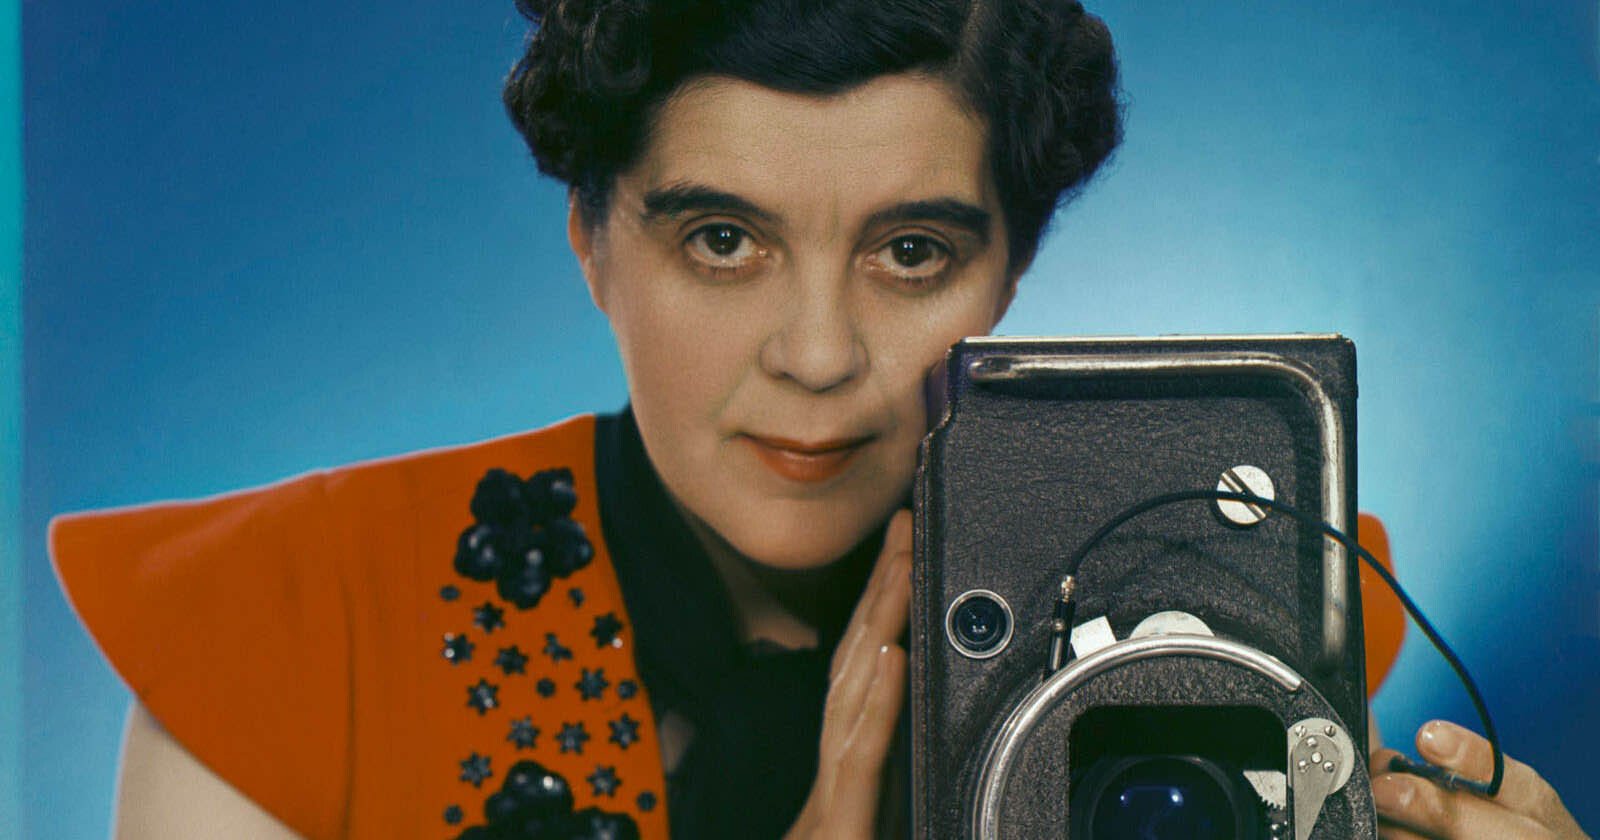 Yevonde: An Introduction to the Woman Who Pioneered Color Photography